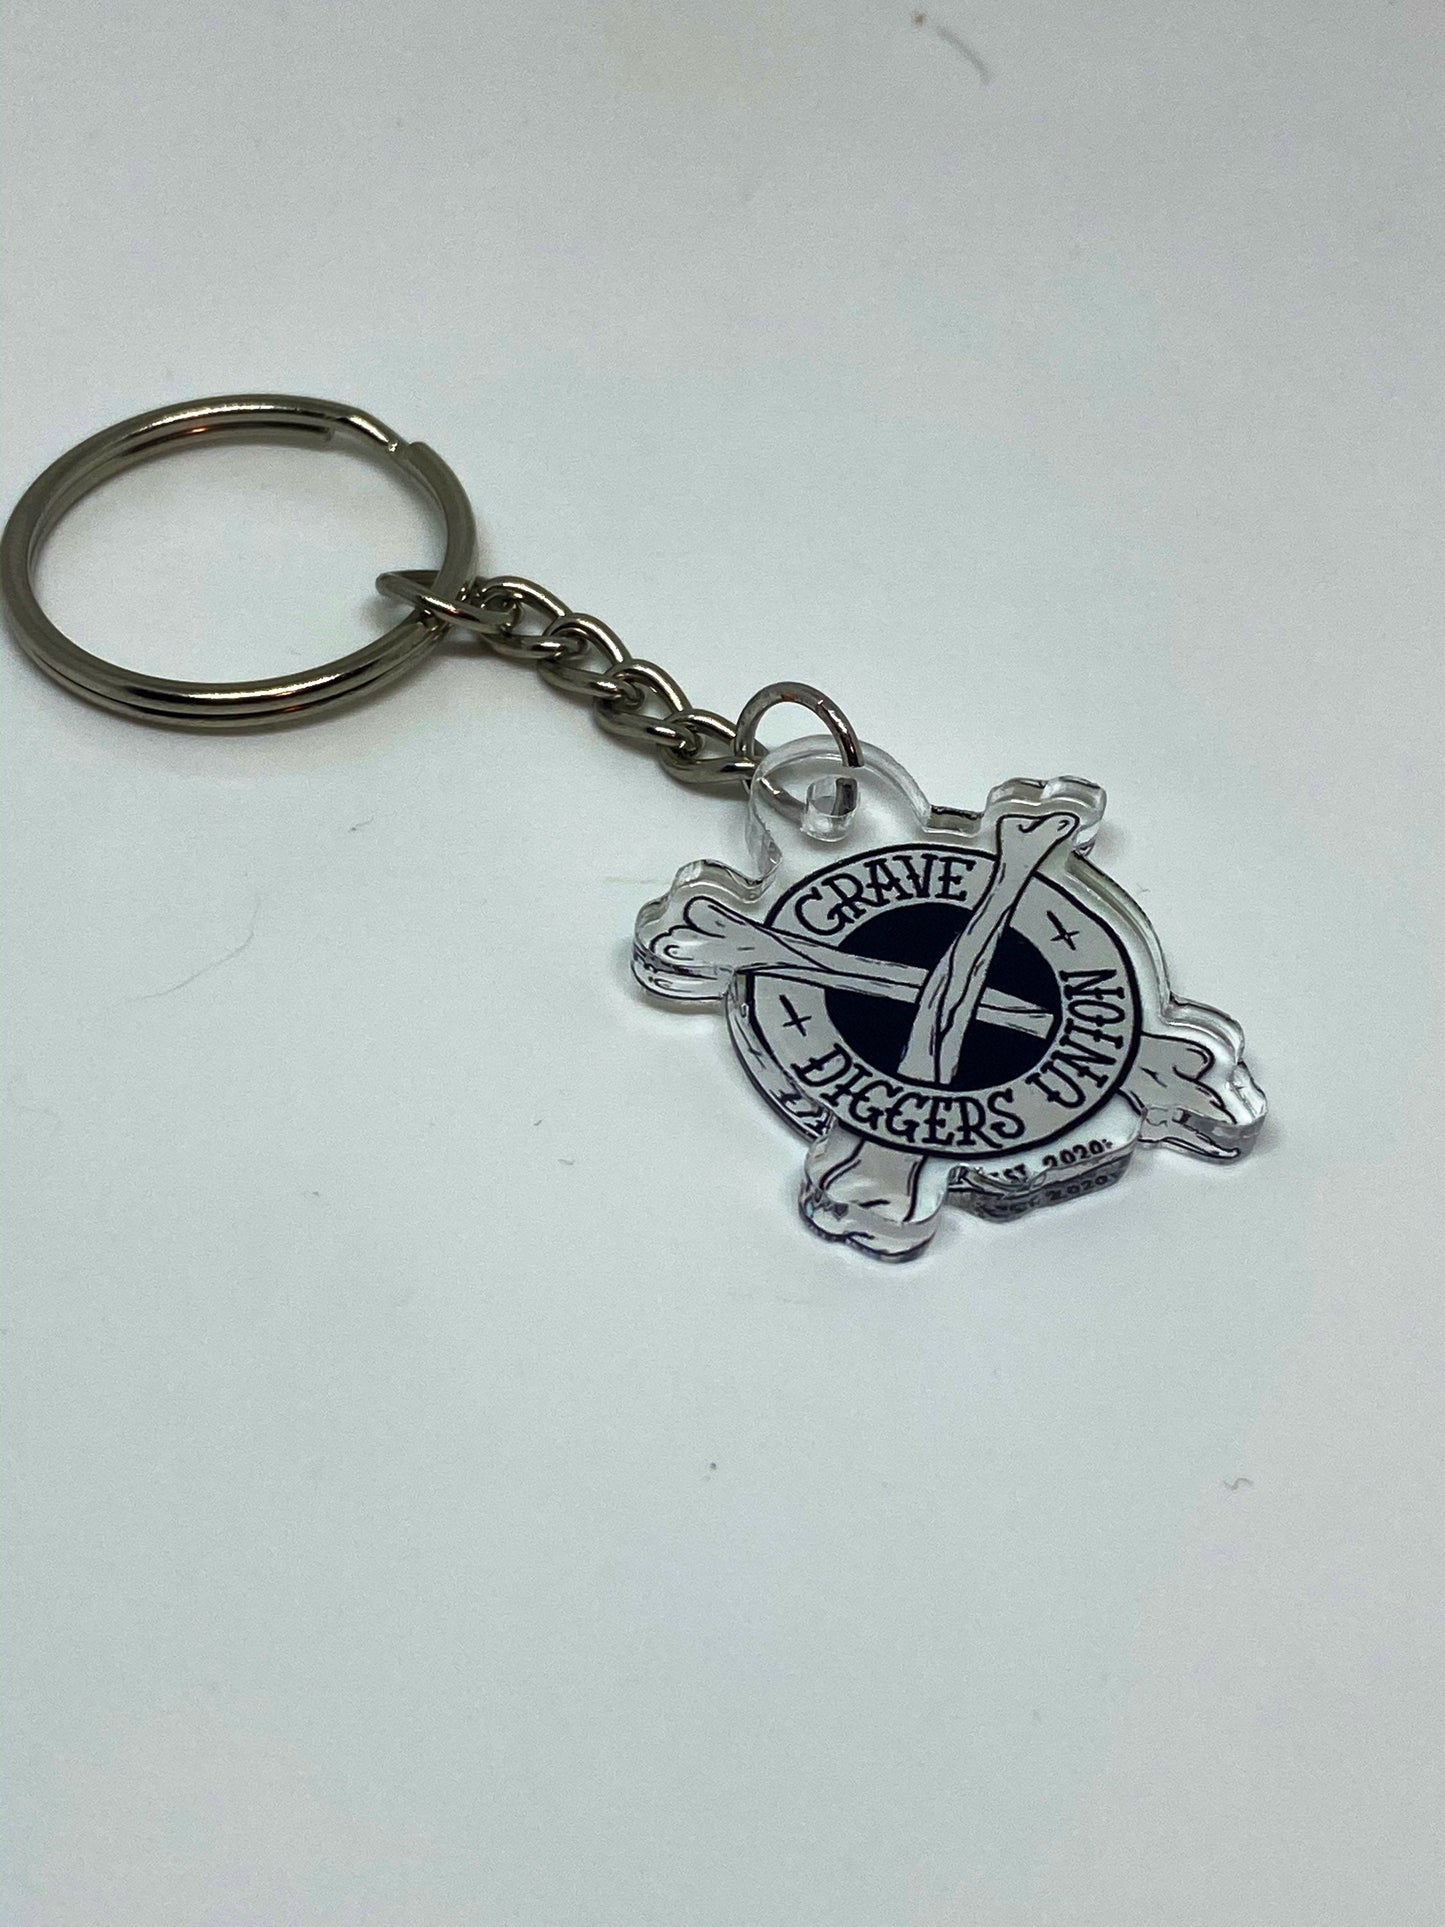 Grave Diggers Union Keychain.